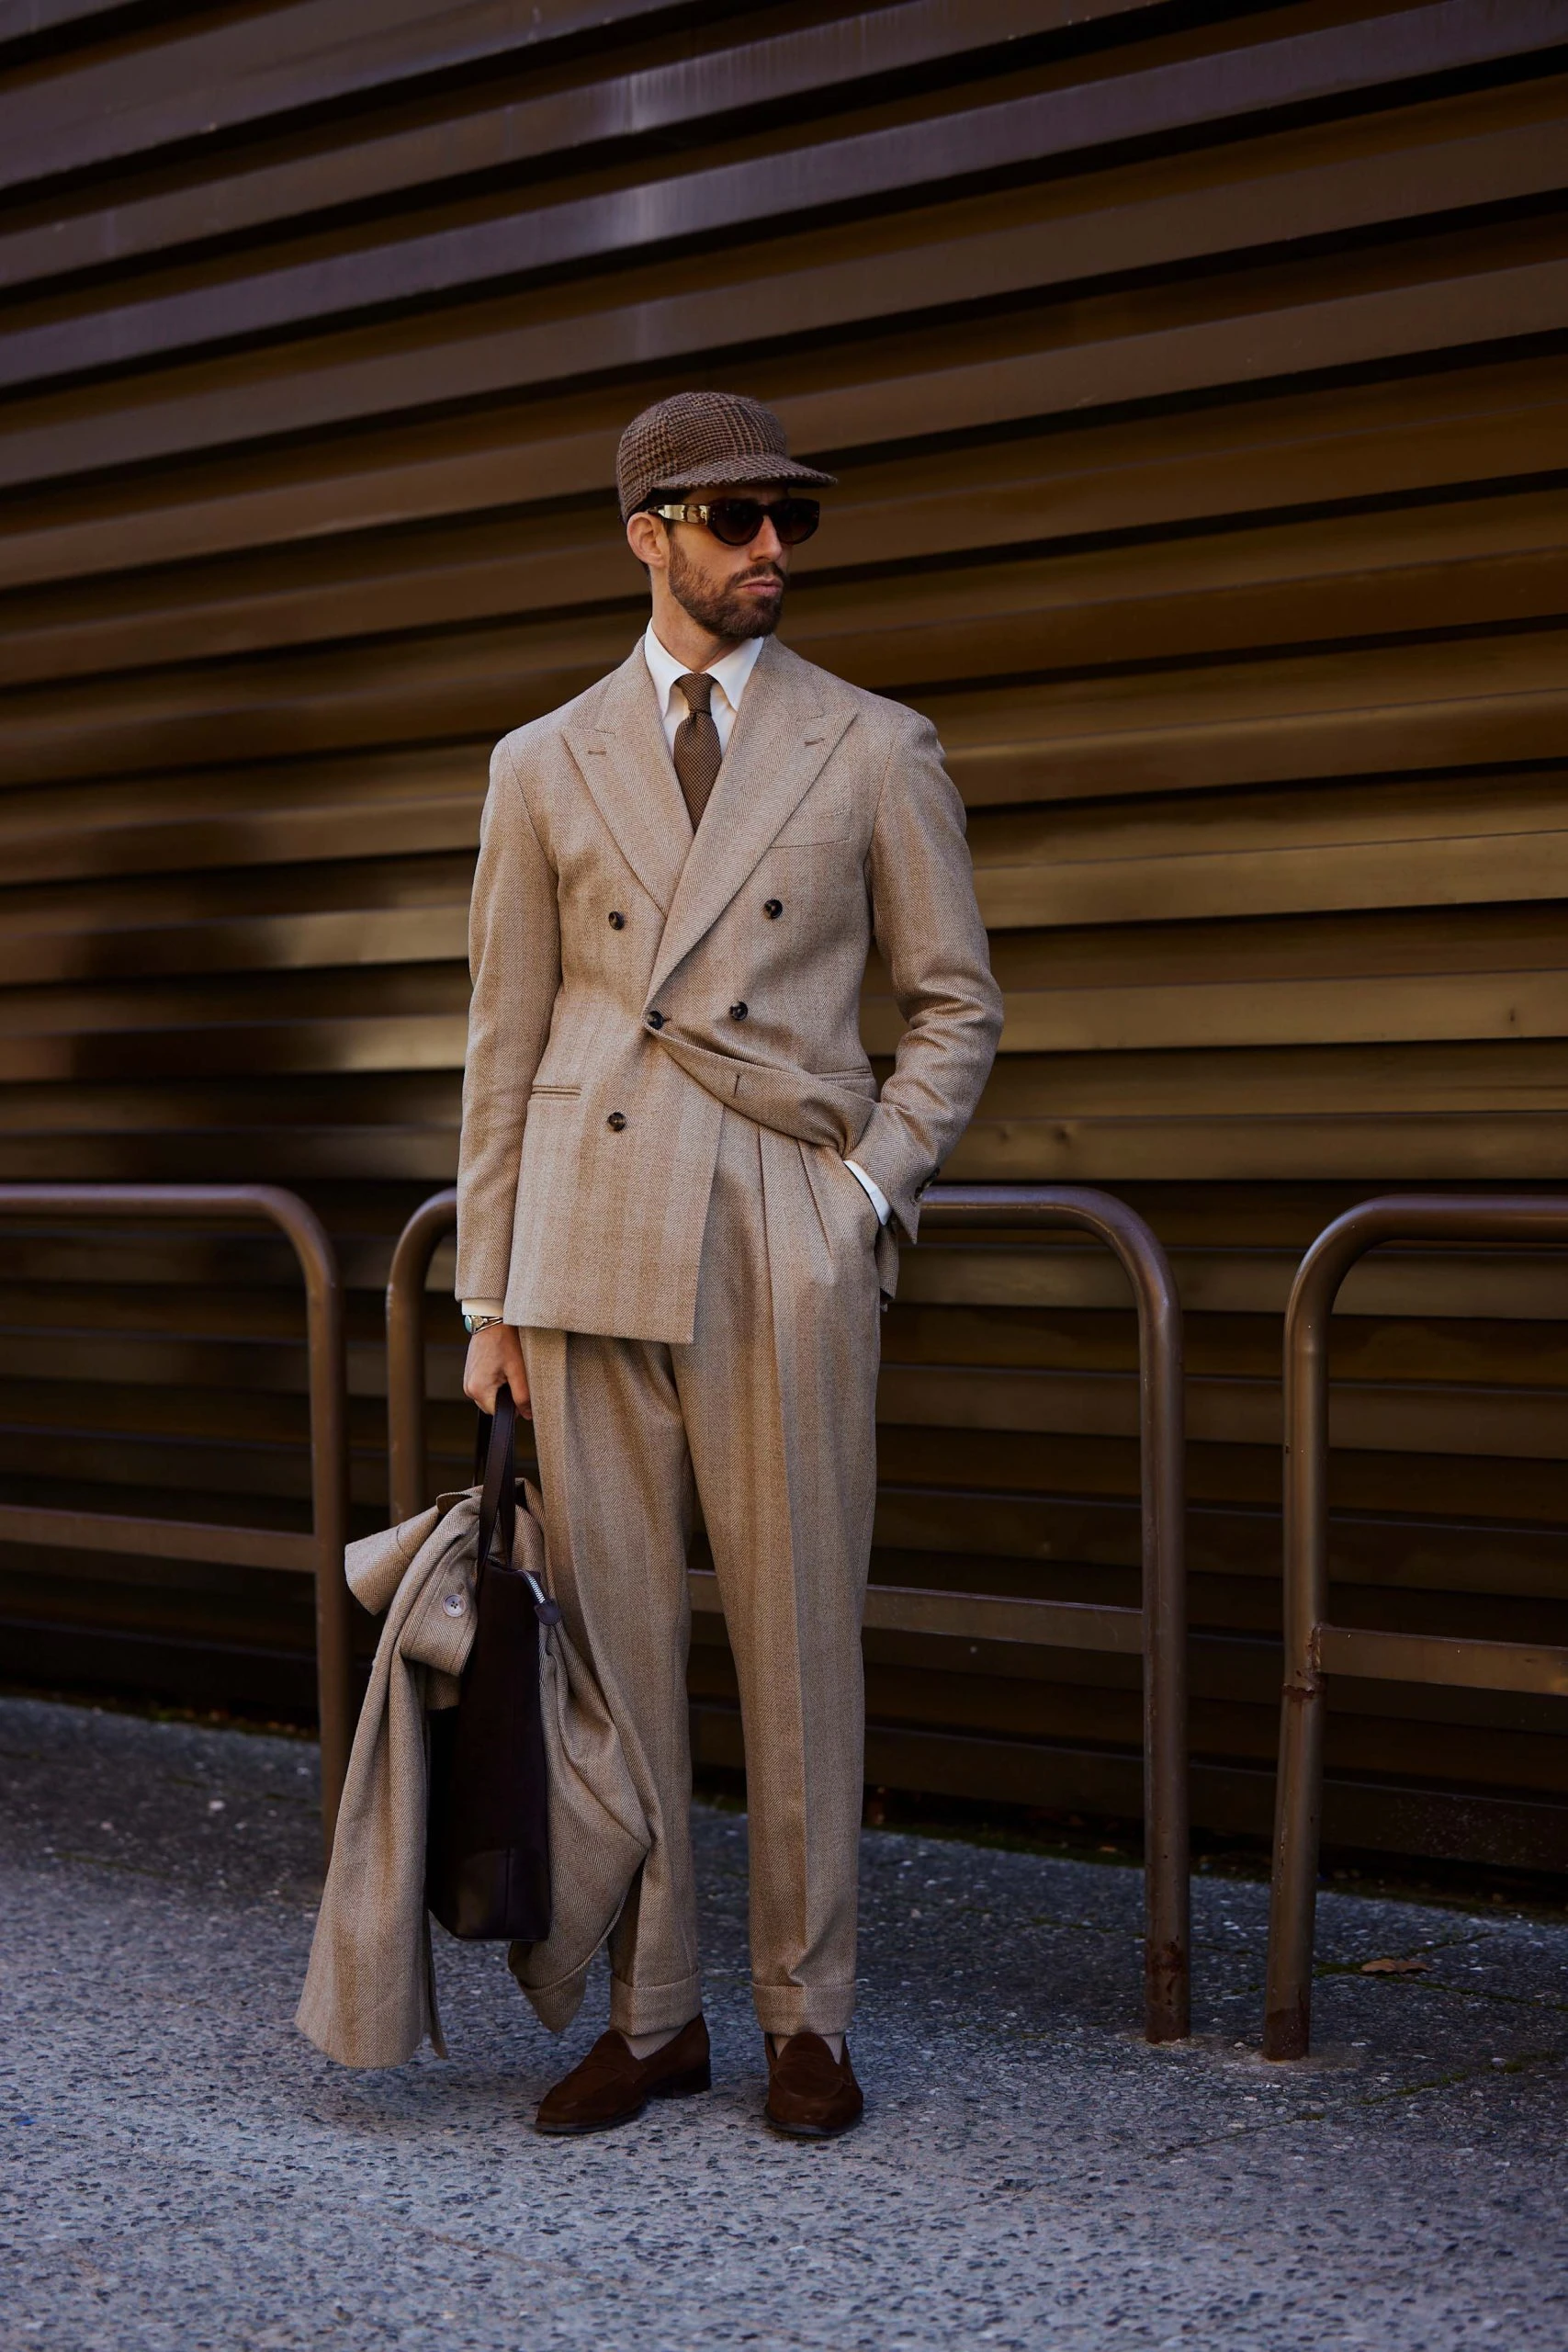 carlos domord at pitti uomo wearing a beige custom made mond suit